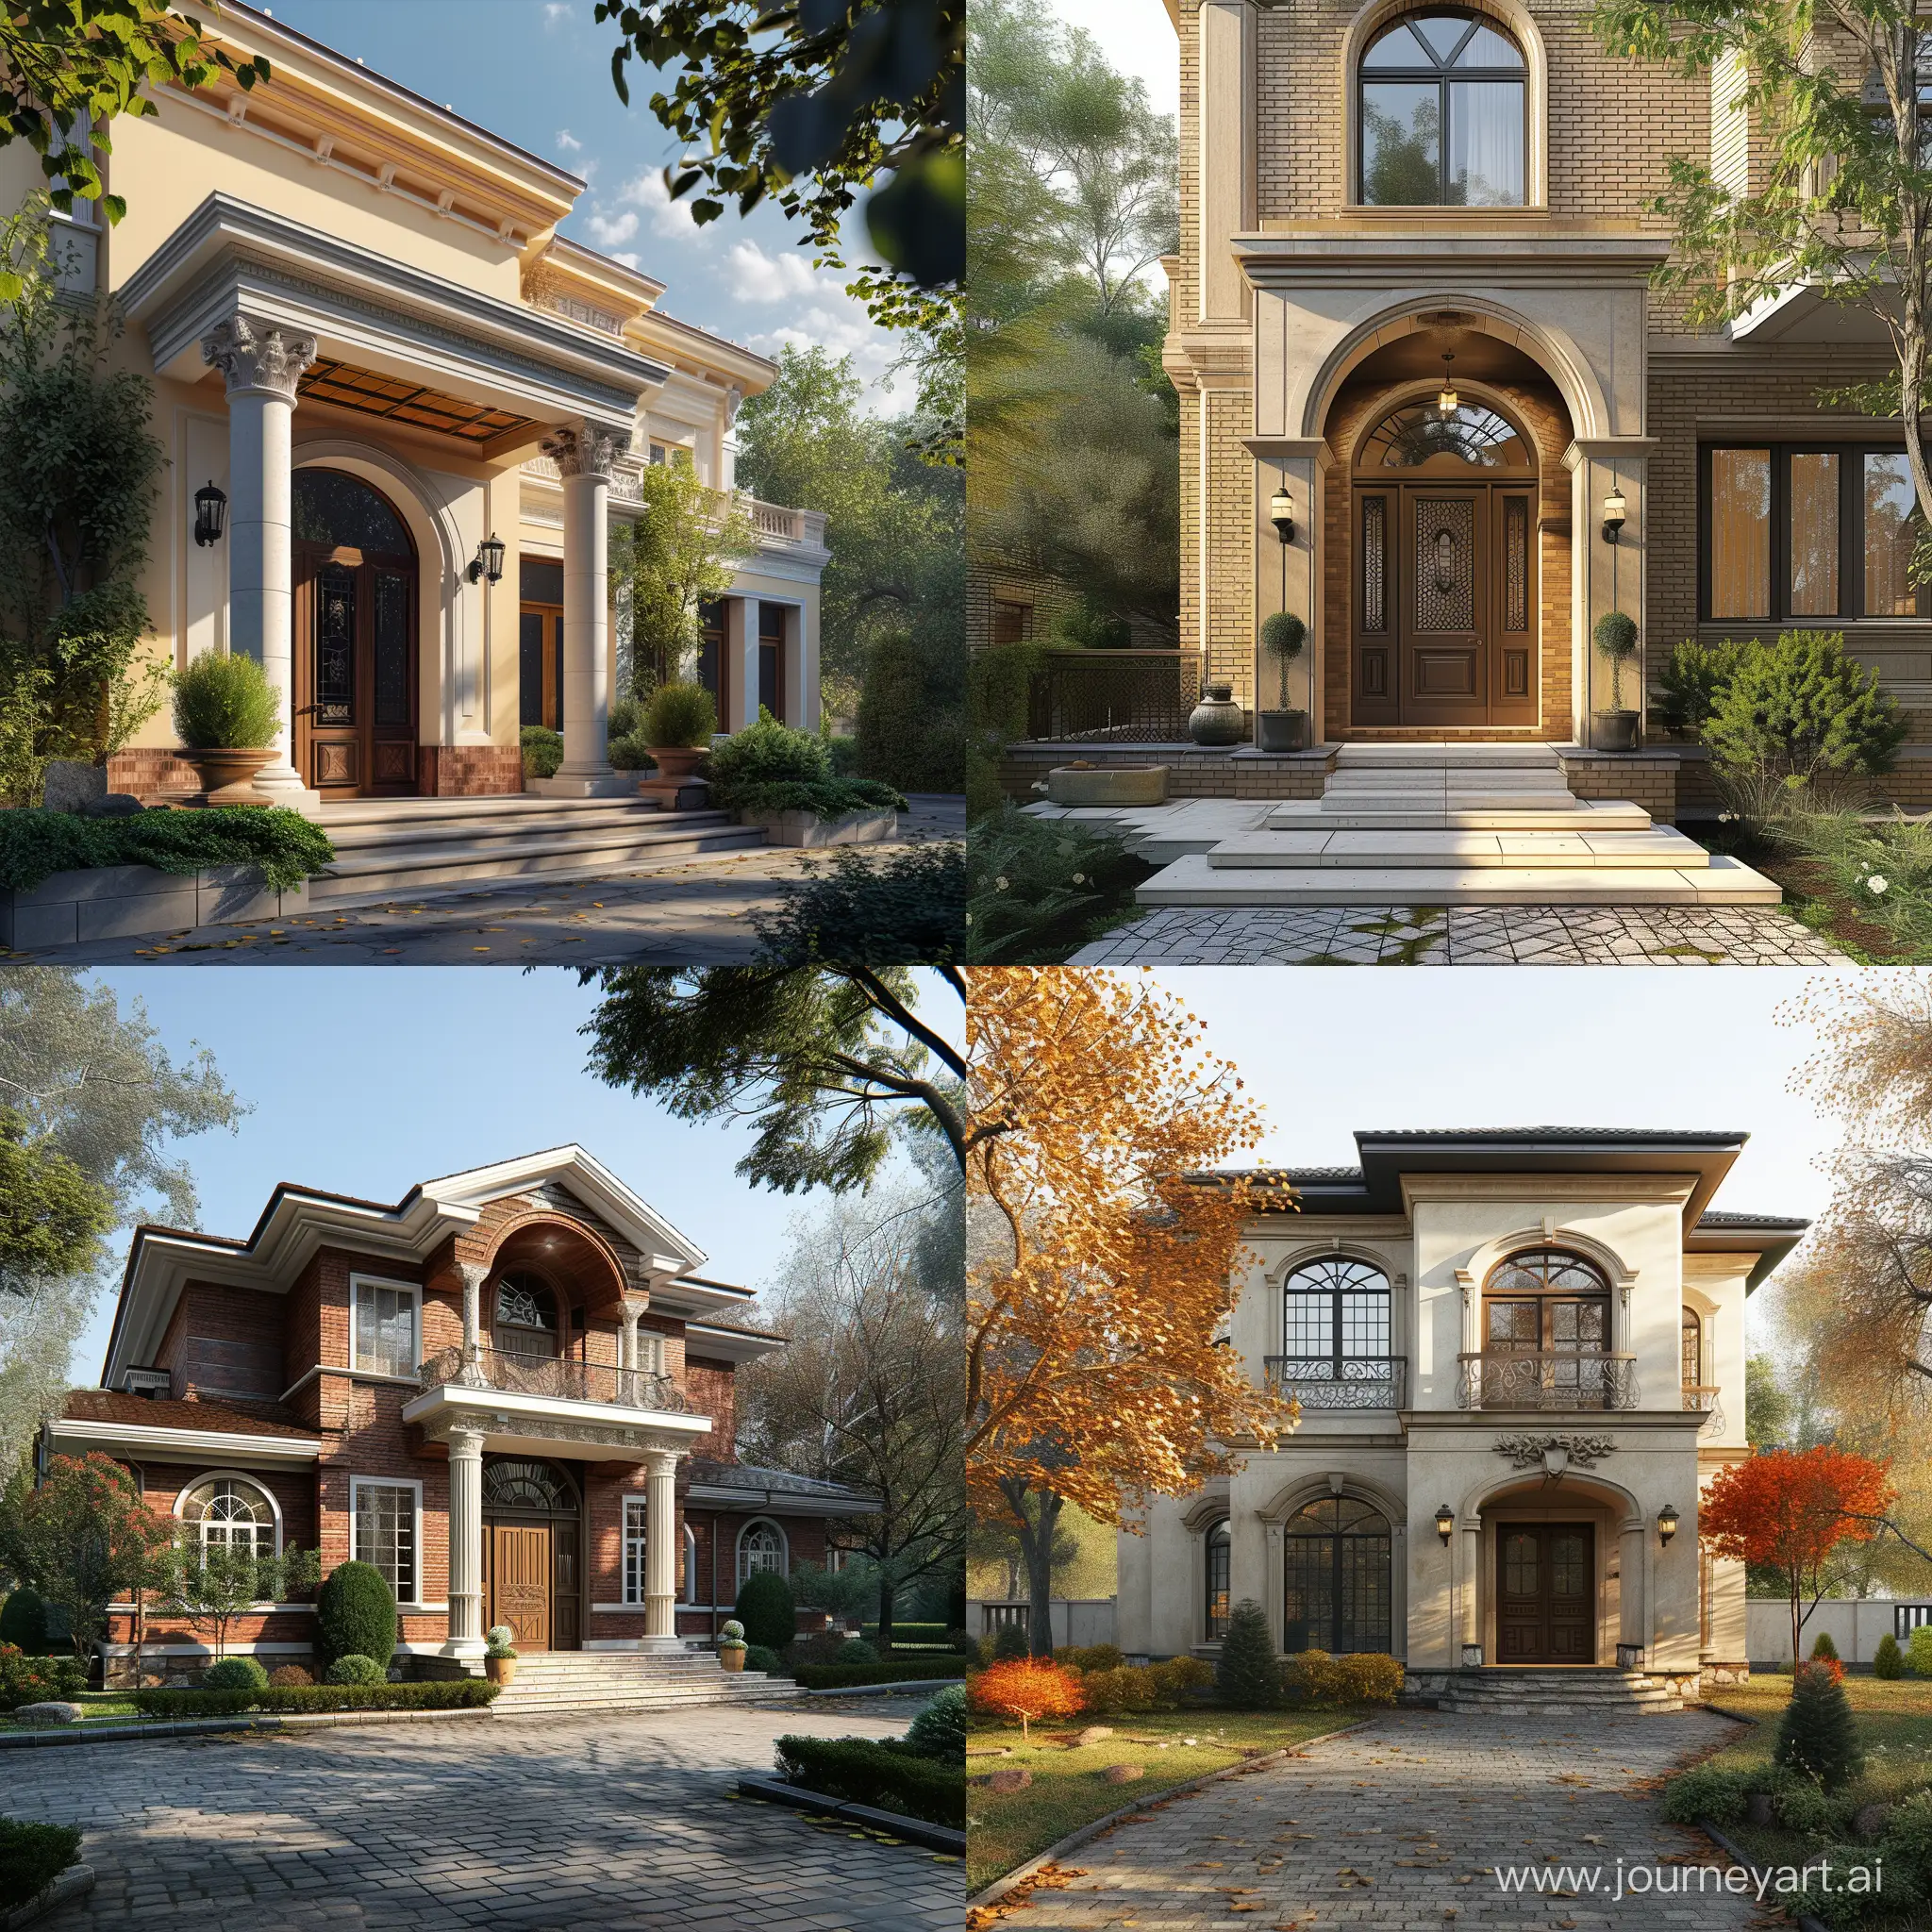 Design a house in the style of reconstruction architecture. And collage techniques. Focus on the entrance of the house. Do not change too much. Collage techniques are analog. The final output should be shown as a realistic image.